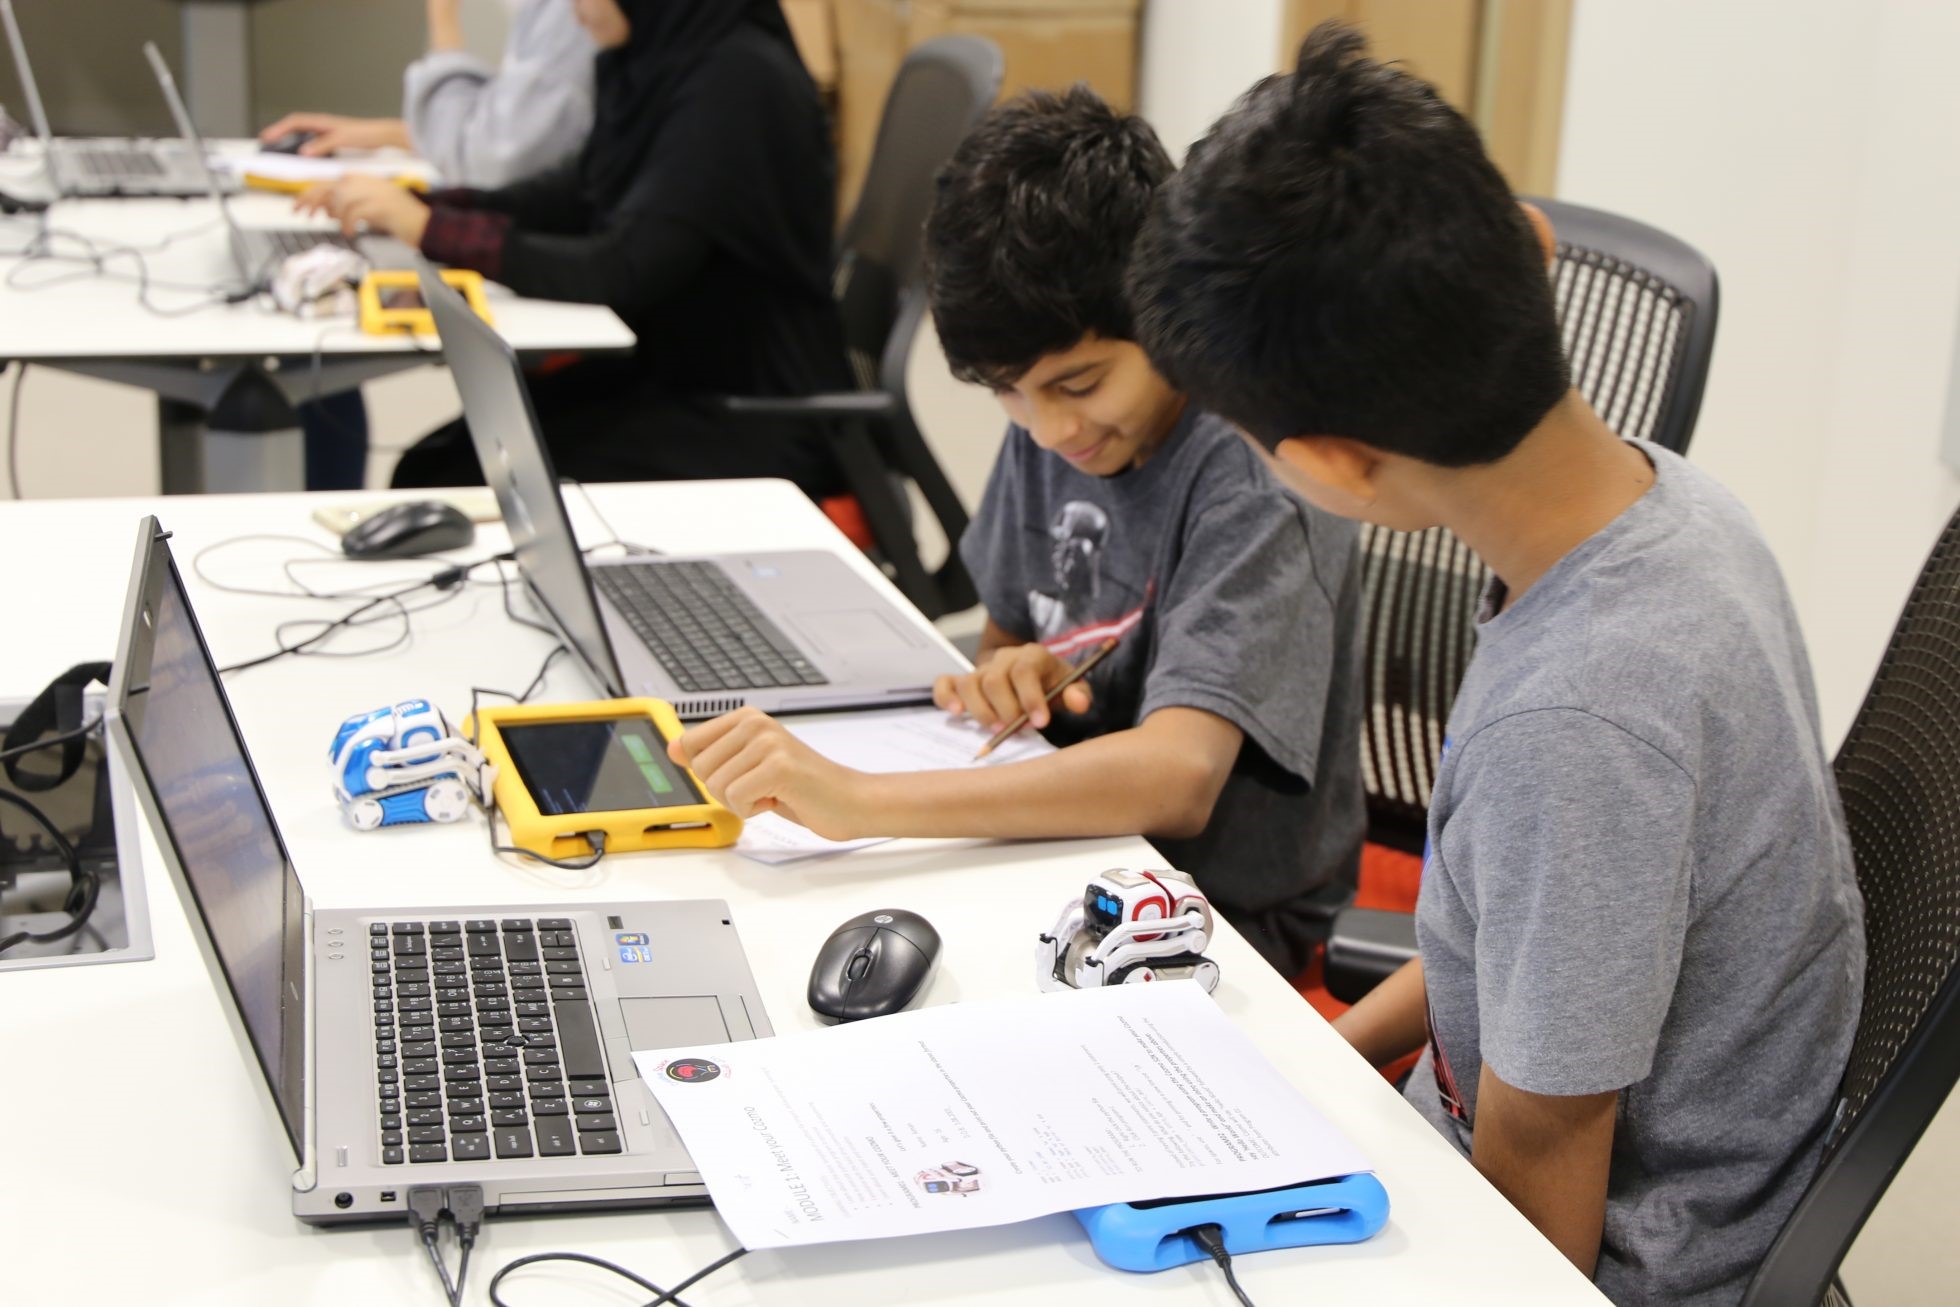 QCRI Opens Registration for Creative Space Summer Camp